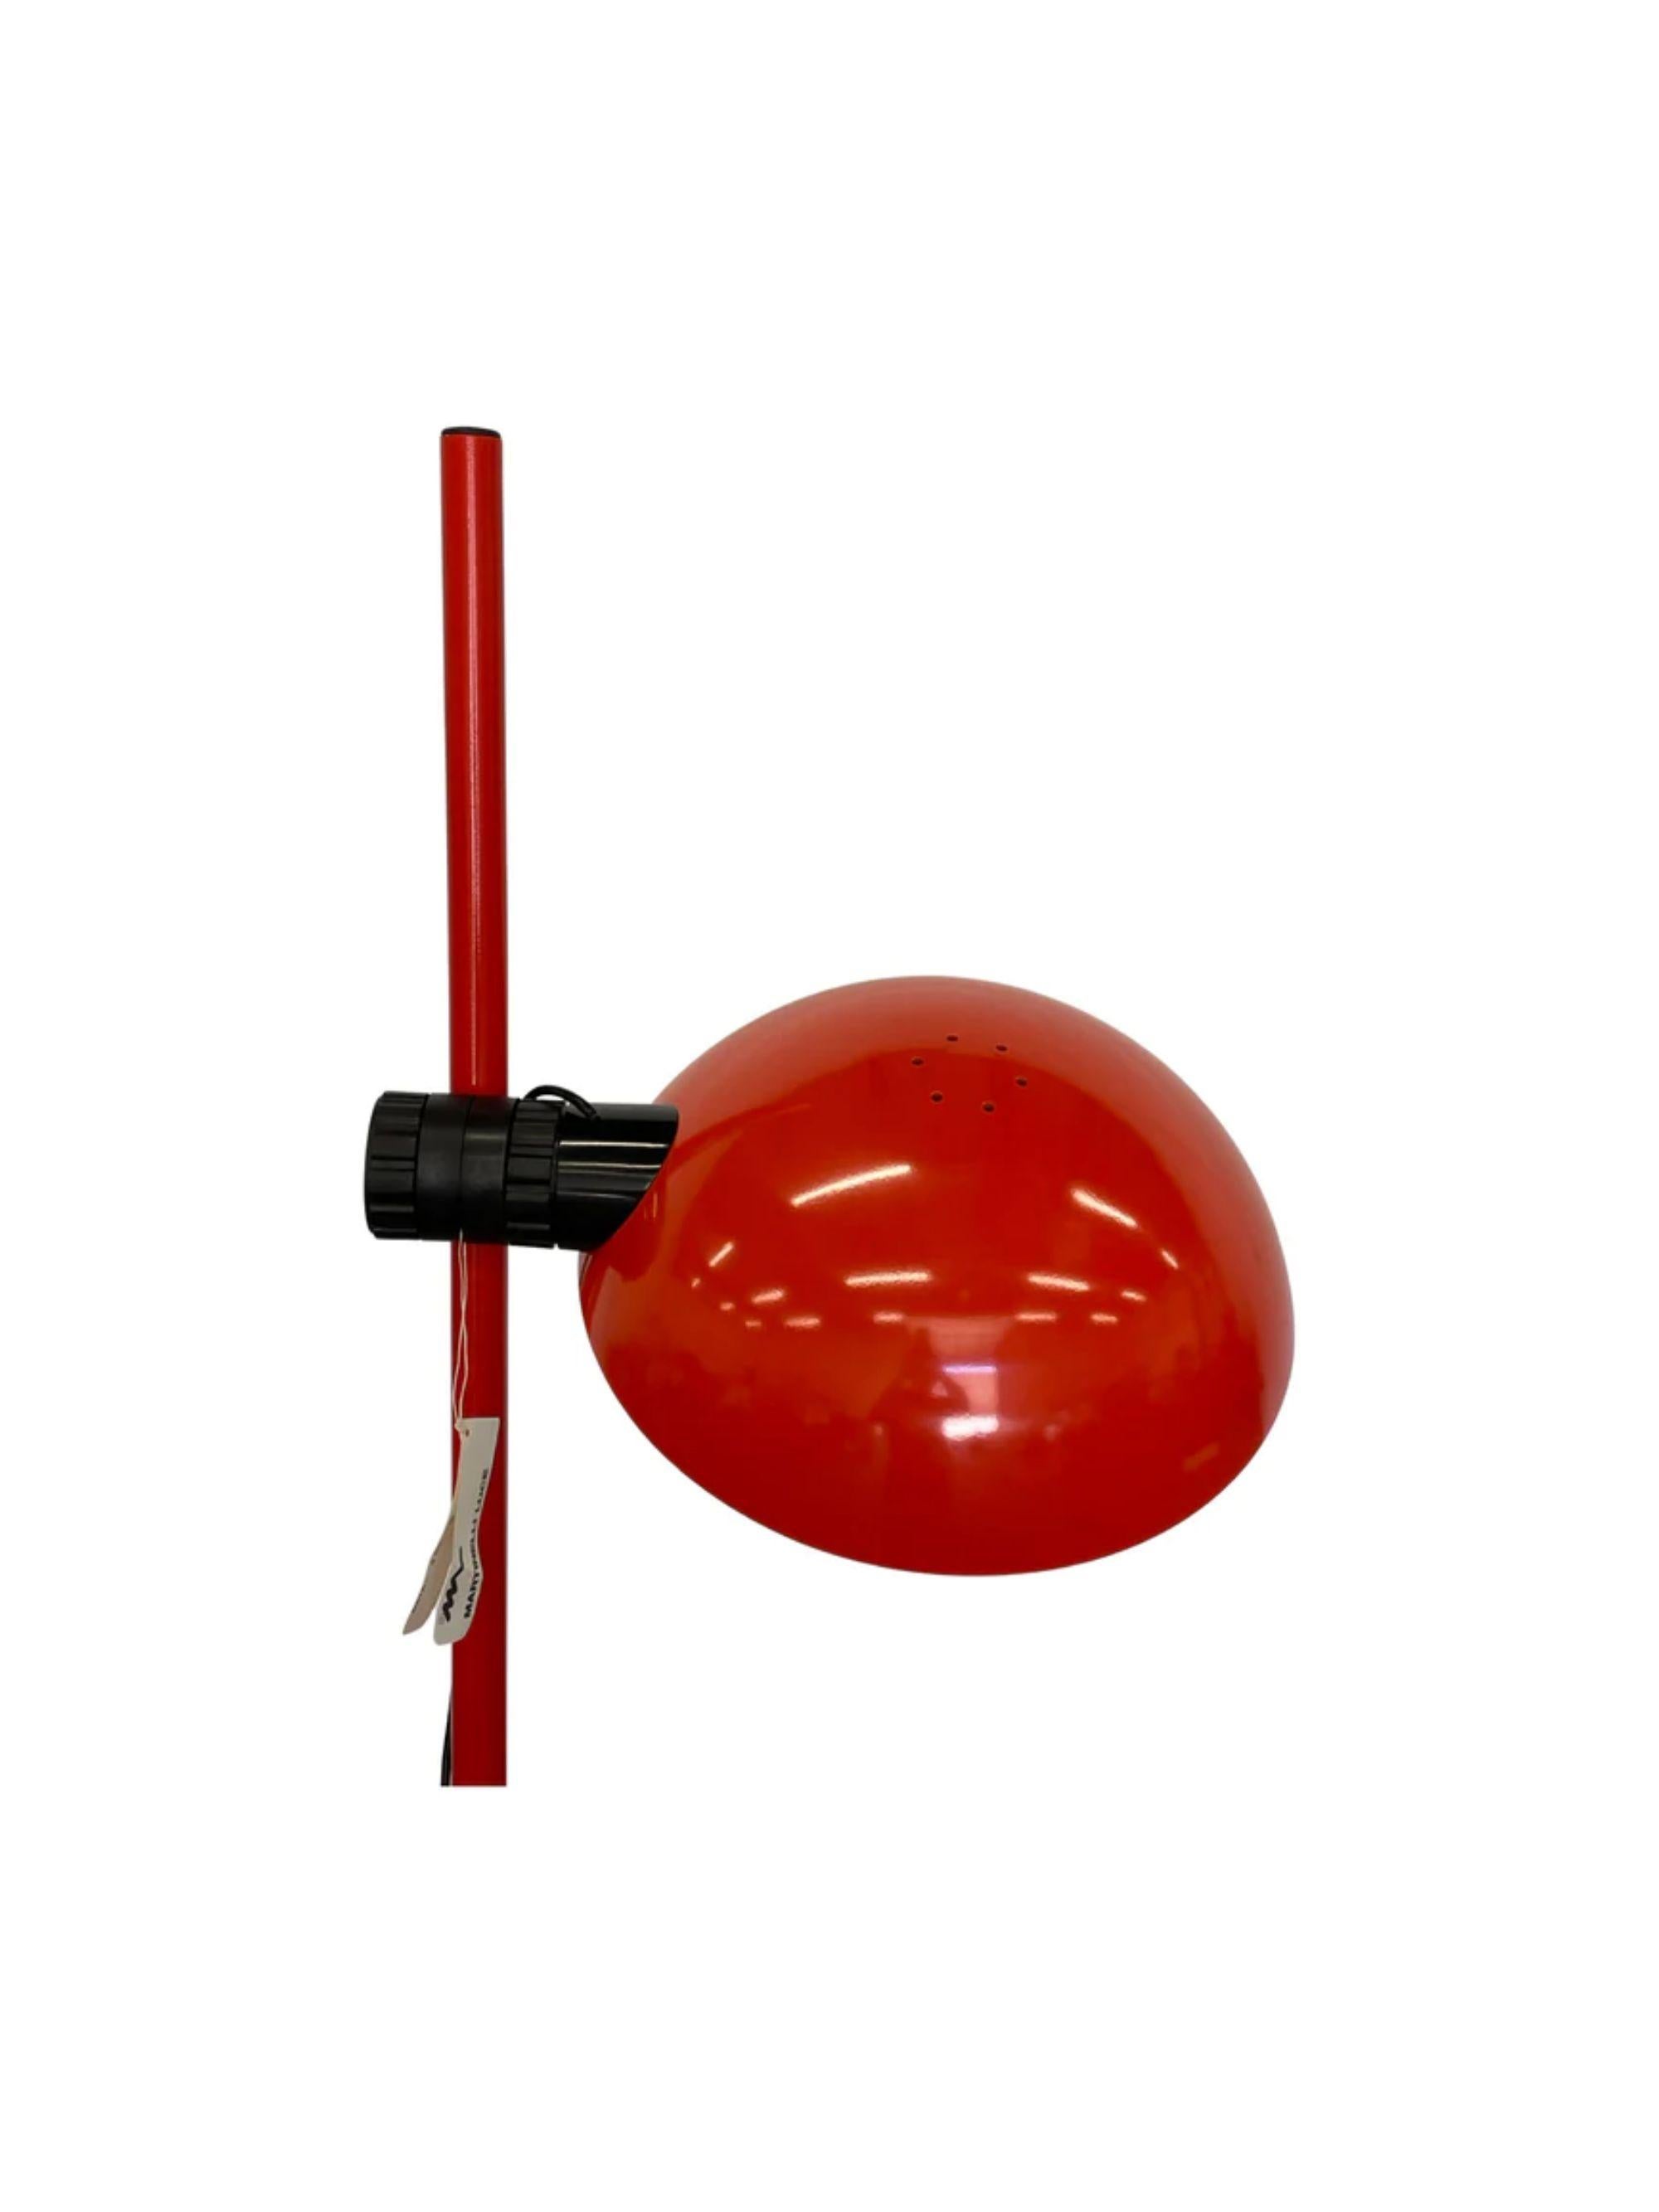 Elio Martinelli rare adjustable red floor lamp for Martinelli Luce, Italy, 1970s

Additional Information:
Materials: Enameled steel, aluminum, plastic
Condition: Very good vintage condition. May show some slight surface scratches. Tested and